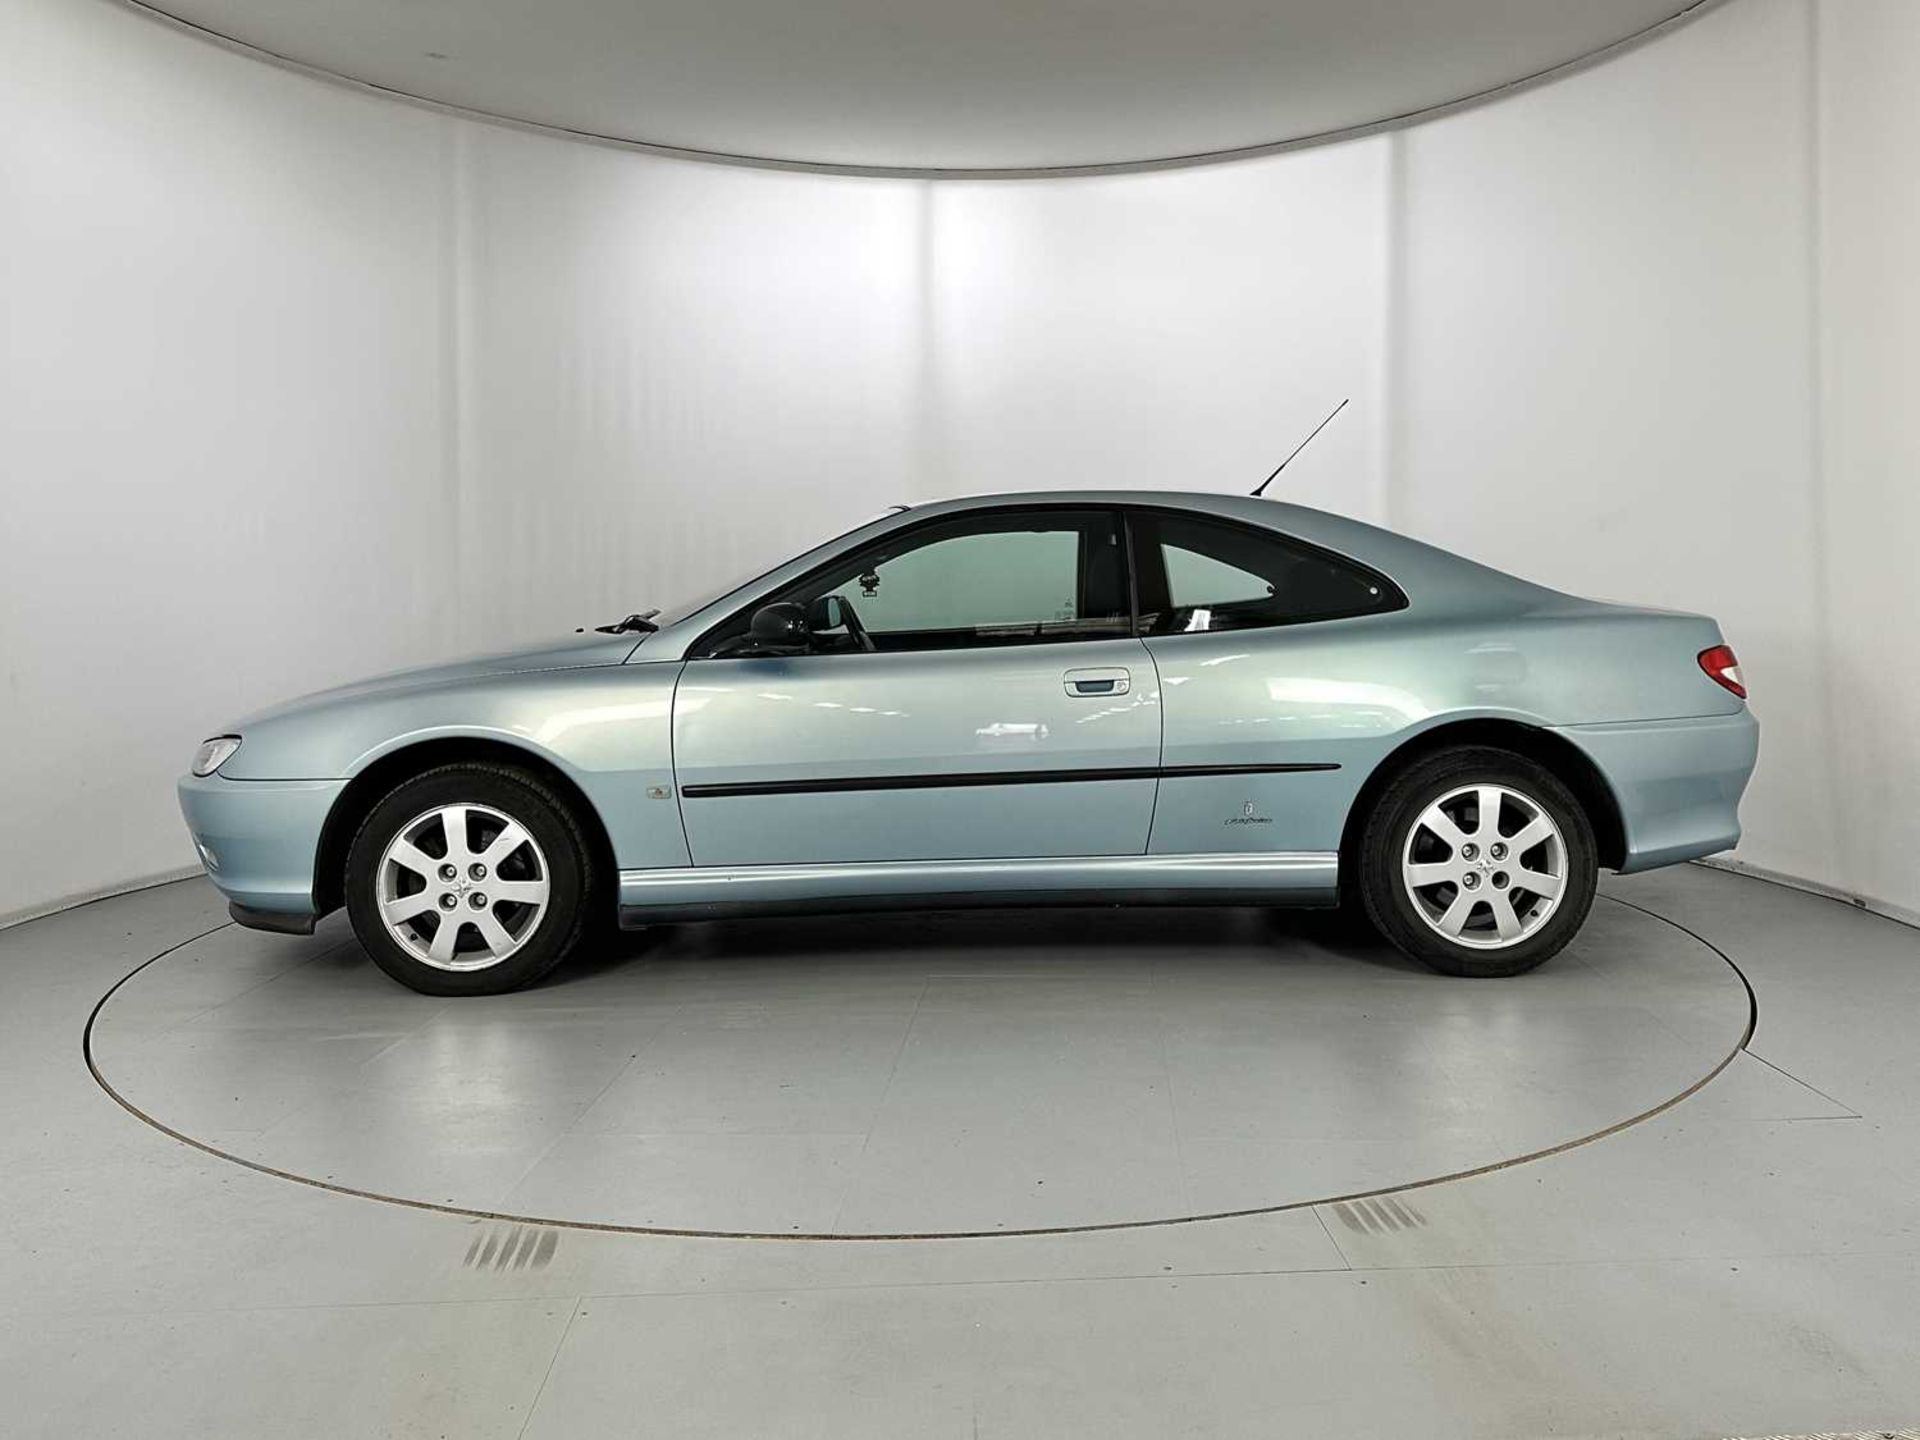 2002 Peugeot 406 Coupe - Image 5 of 28